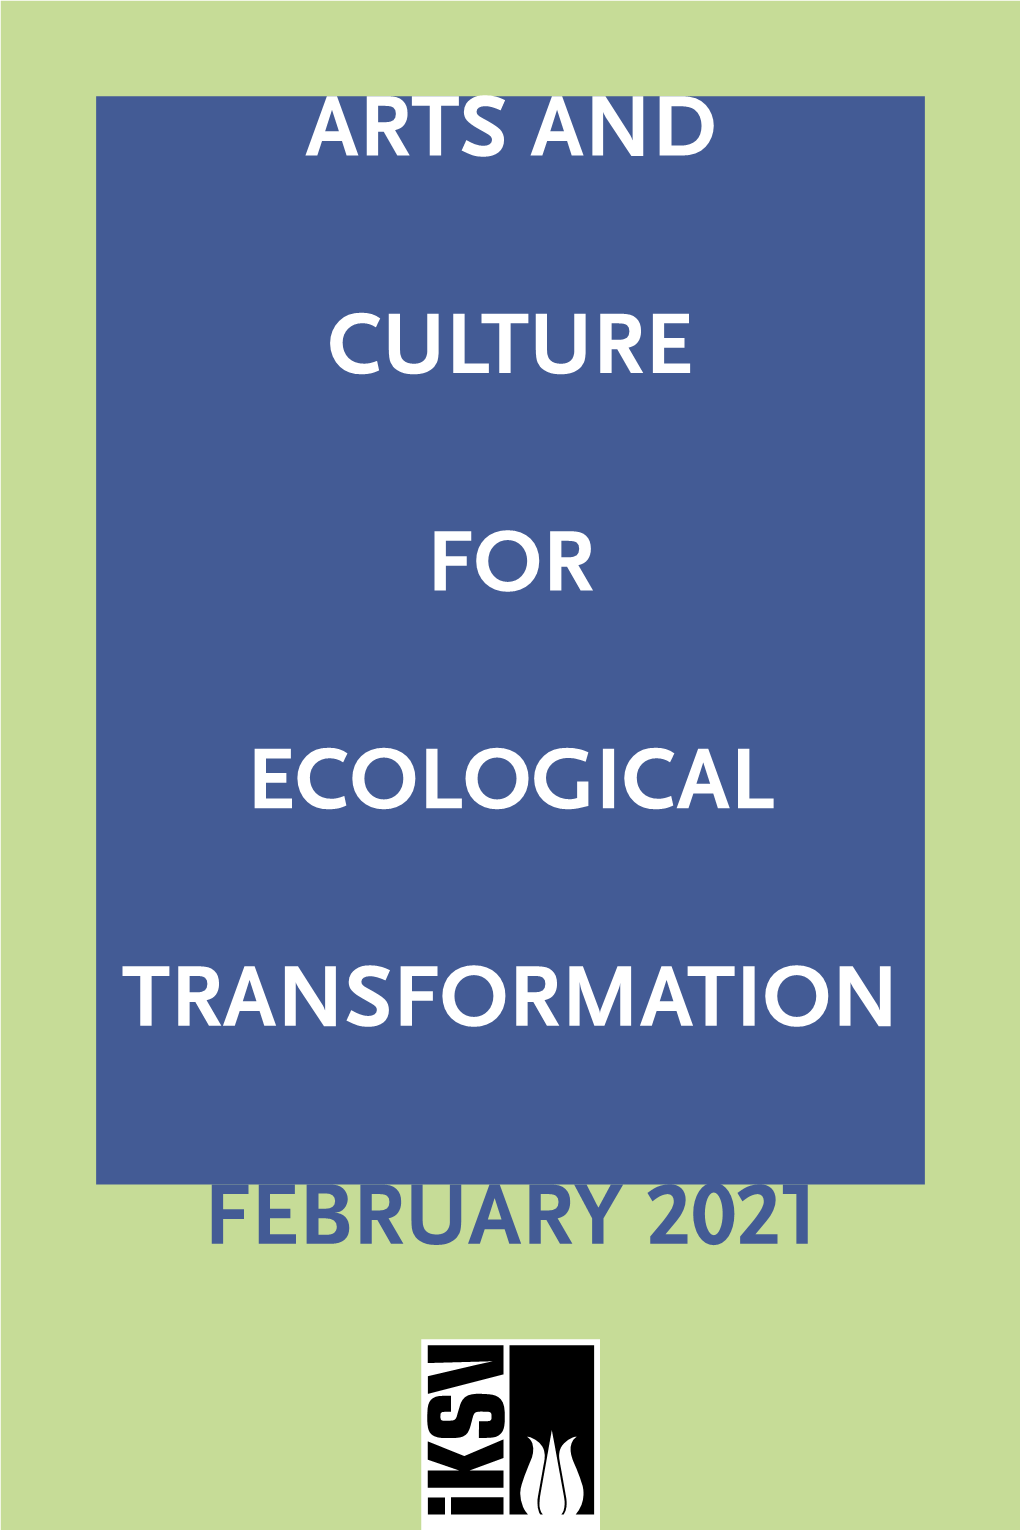 Arts and Culture for Ecological Transformation February 2021